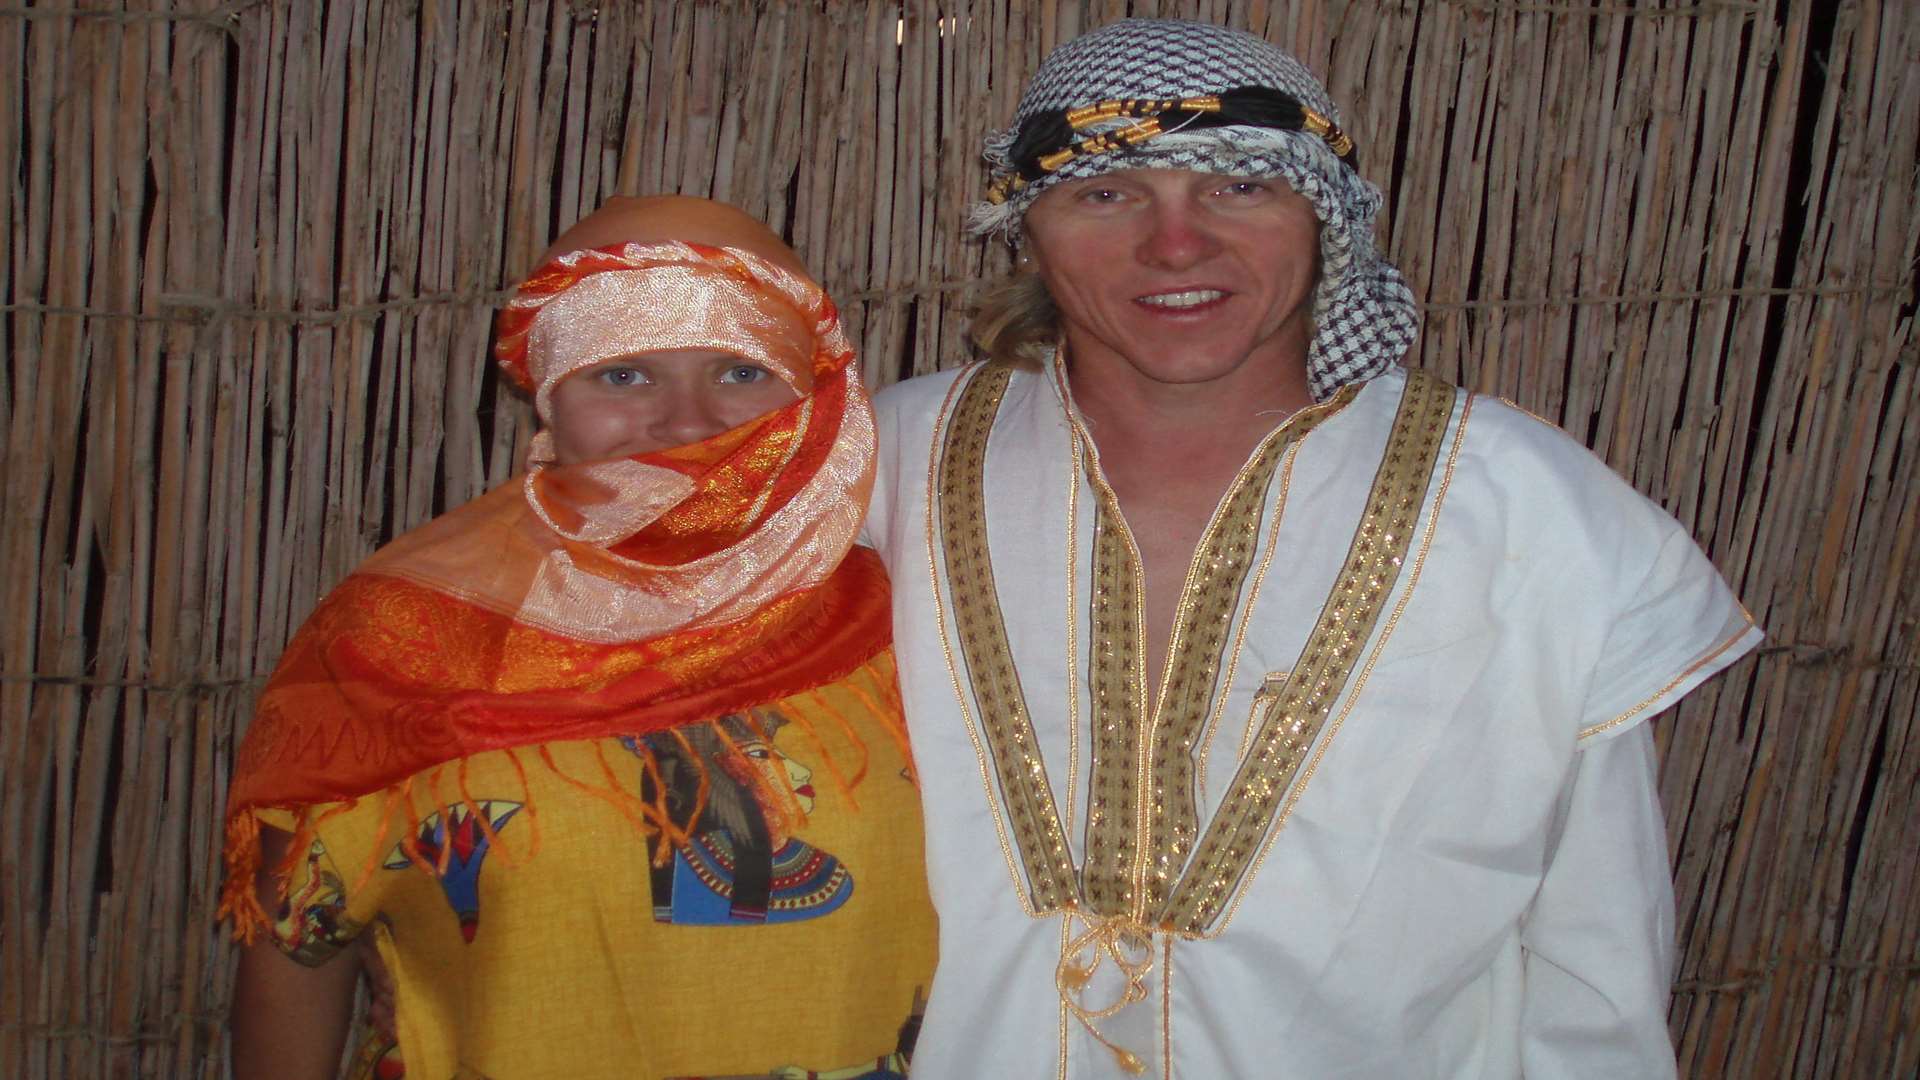 Wedding bells ring for Tony and Larisa in Egypt